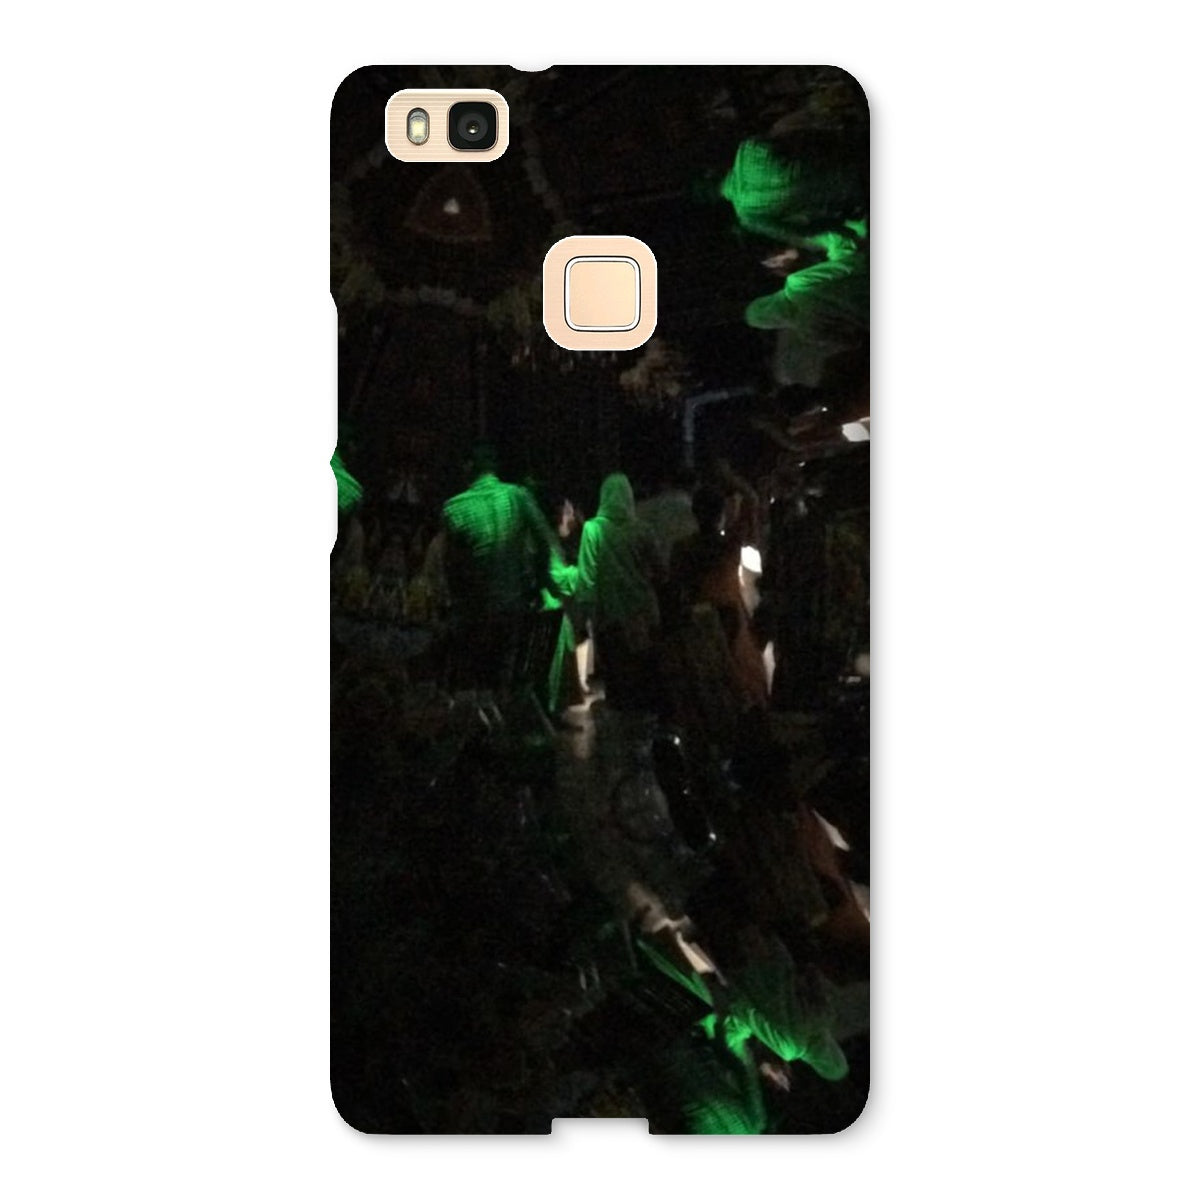 Nightlife Snap Phone Case - Stylish and Durable Cases for Any Phone, Goodies N Stuff